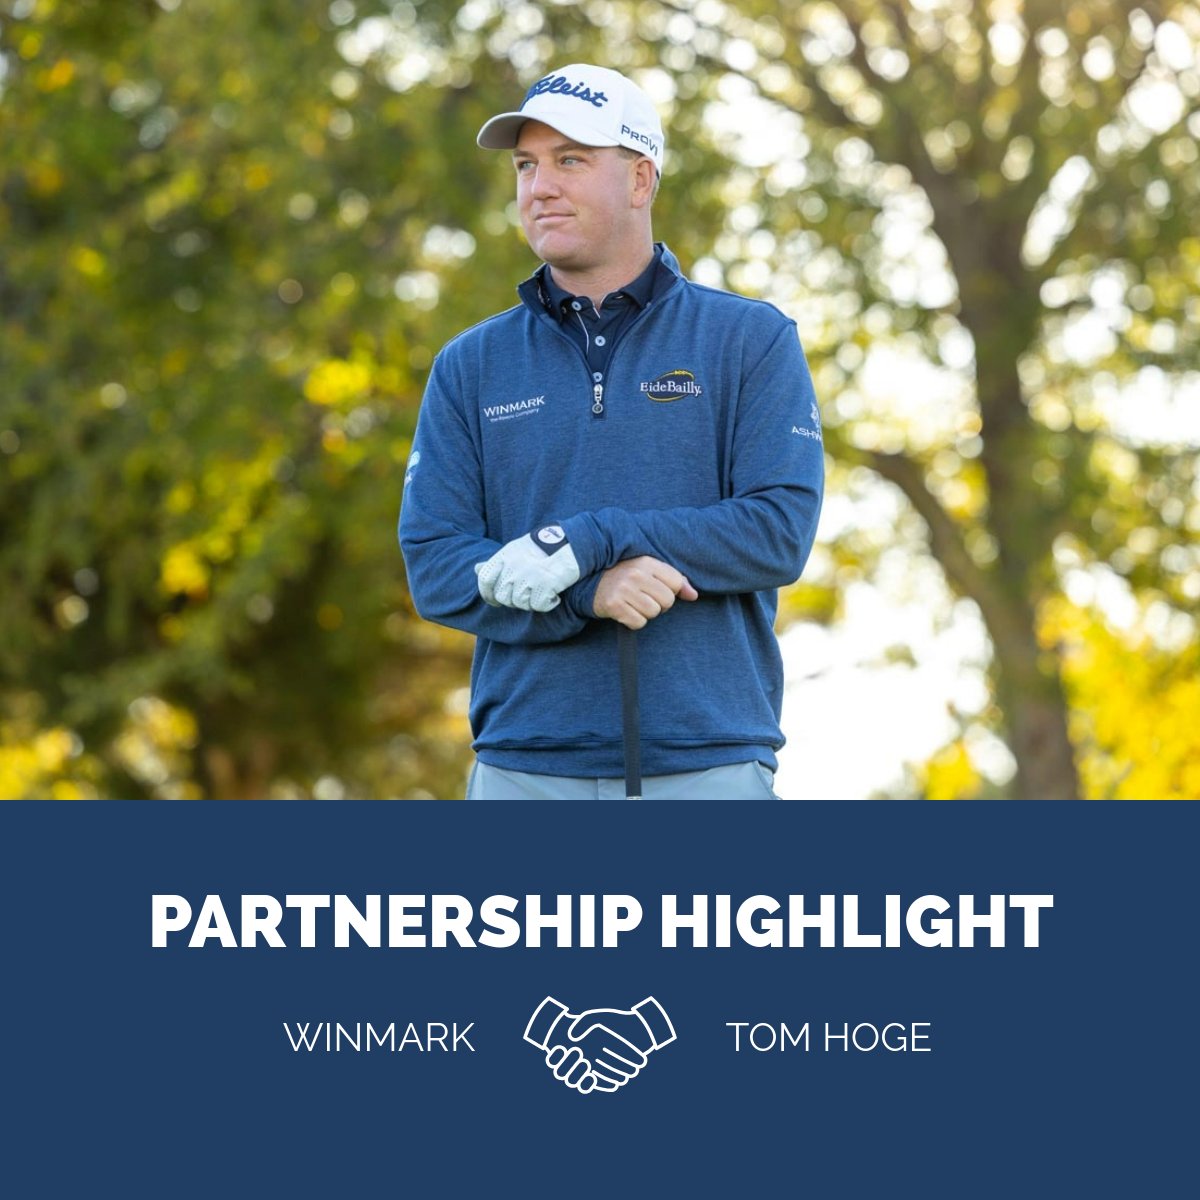 Our brand ambassador @HogeGolf’s first experience with Play It Again Sports (and Winmark) was as a young athlete looking for used baseball gear in the Fargo, ND, store. His game may have changed, but his love of sports has not. #WinmarkResale #WinmarkPartnerships #PGA